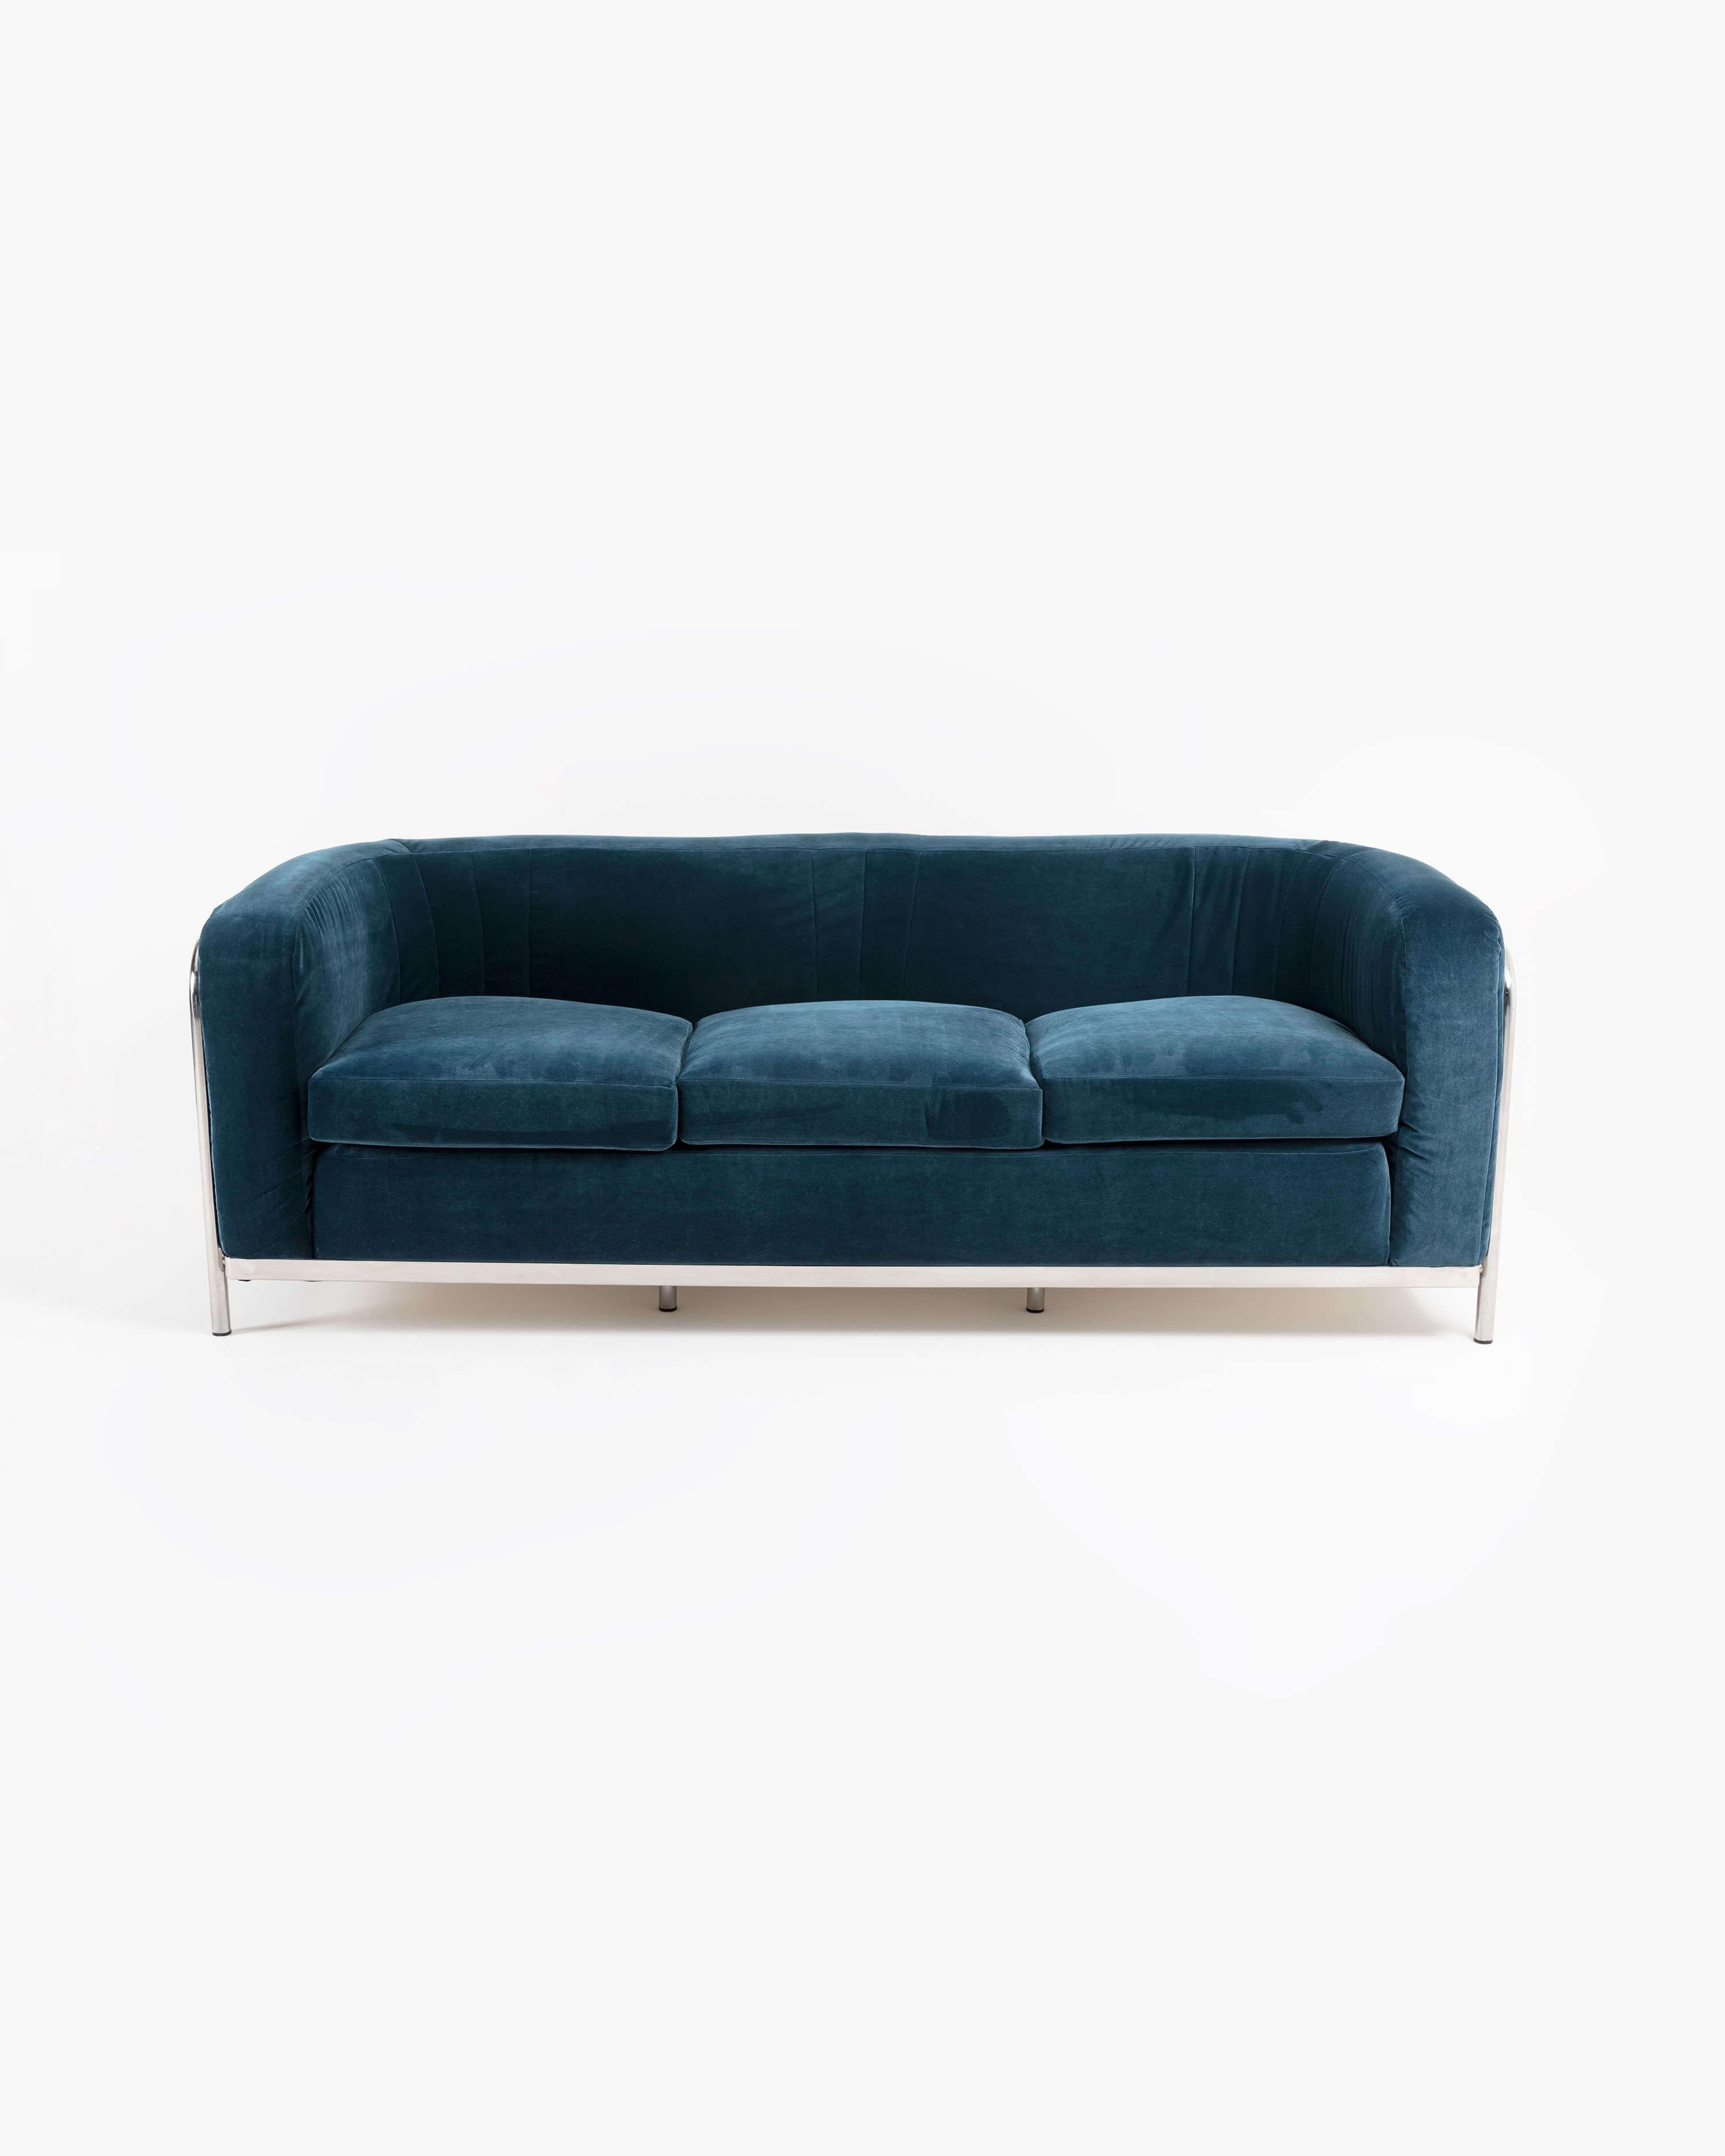 The Onda three-seat sofa–Onda meaning “wave” in Italian–by Jonathan de Pas, Donato D'Urbino and Paolo Lomazzi, earns its namesake from the tubular stainless steel frame that forms its support structure, curving in and out along the back of the seat.